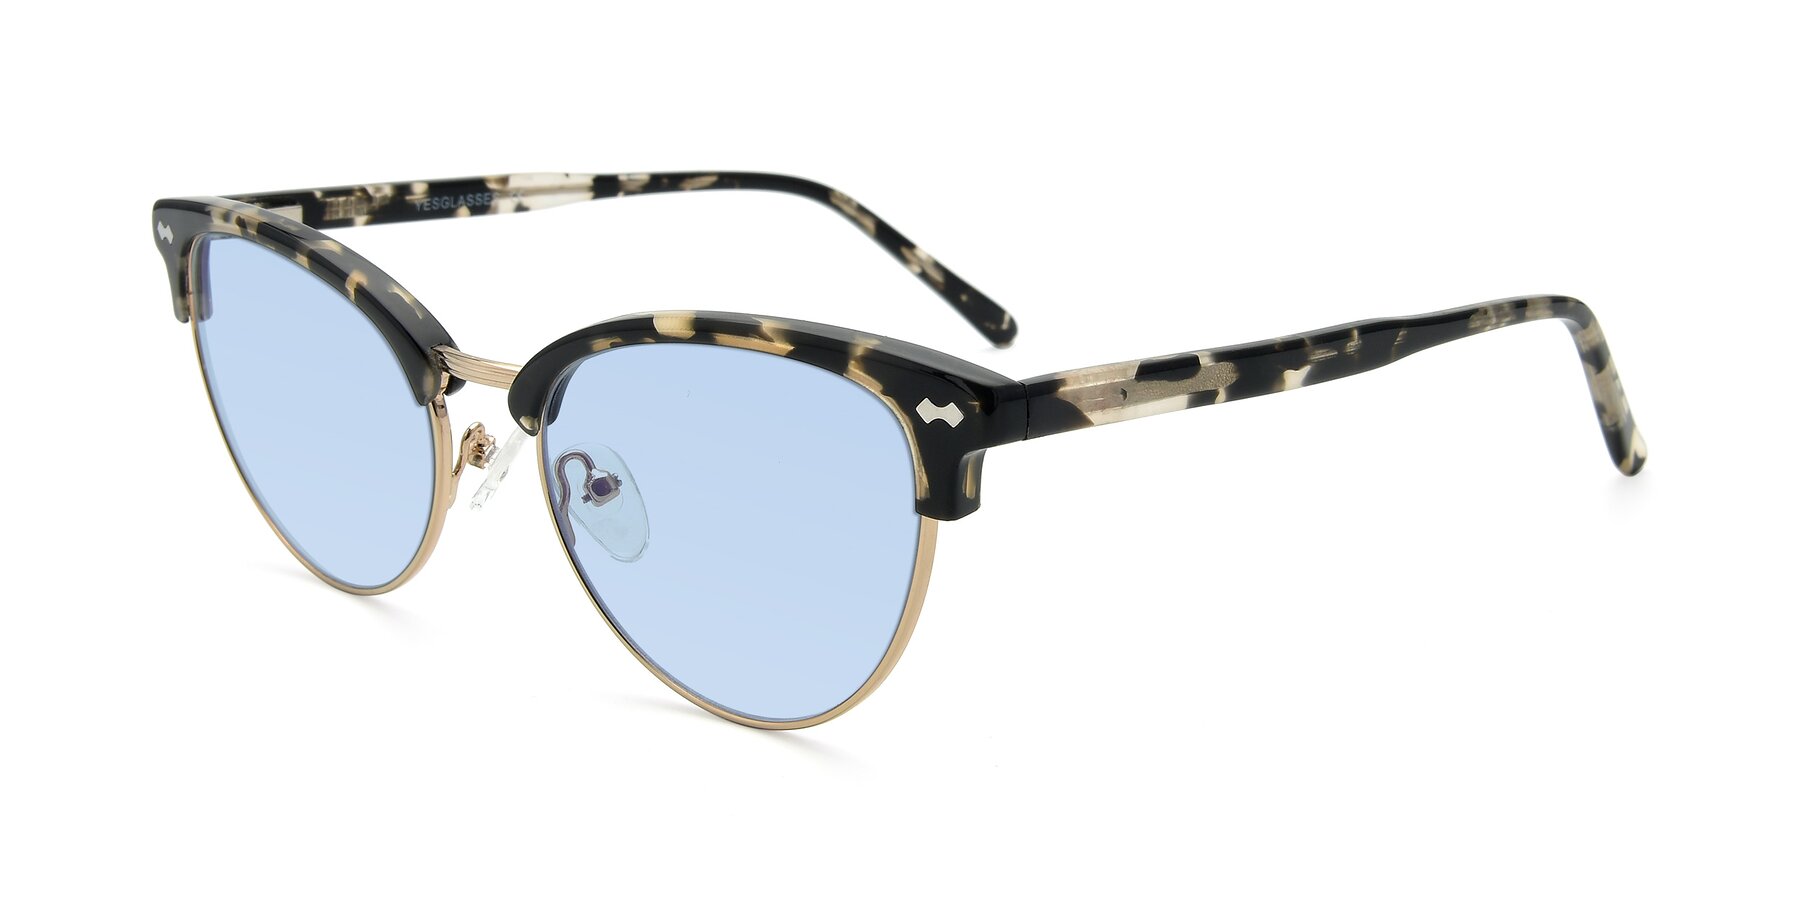 Angle of 17461 in Tortoise-Gold with Light Blue Tinted Lenses